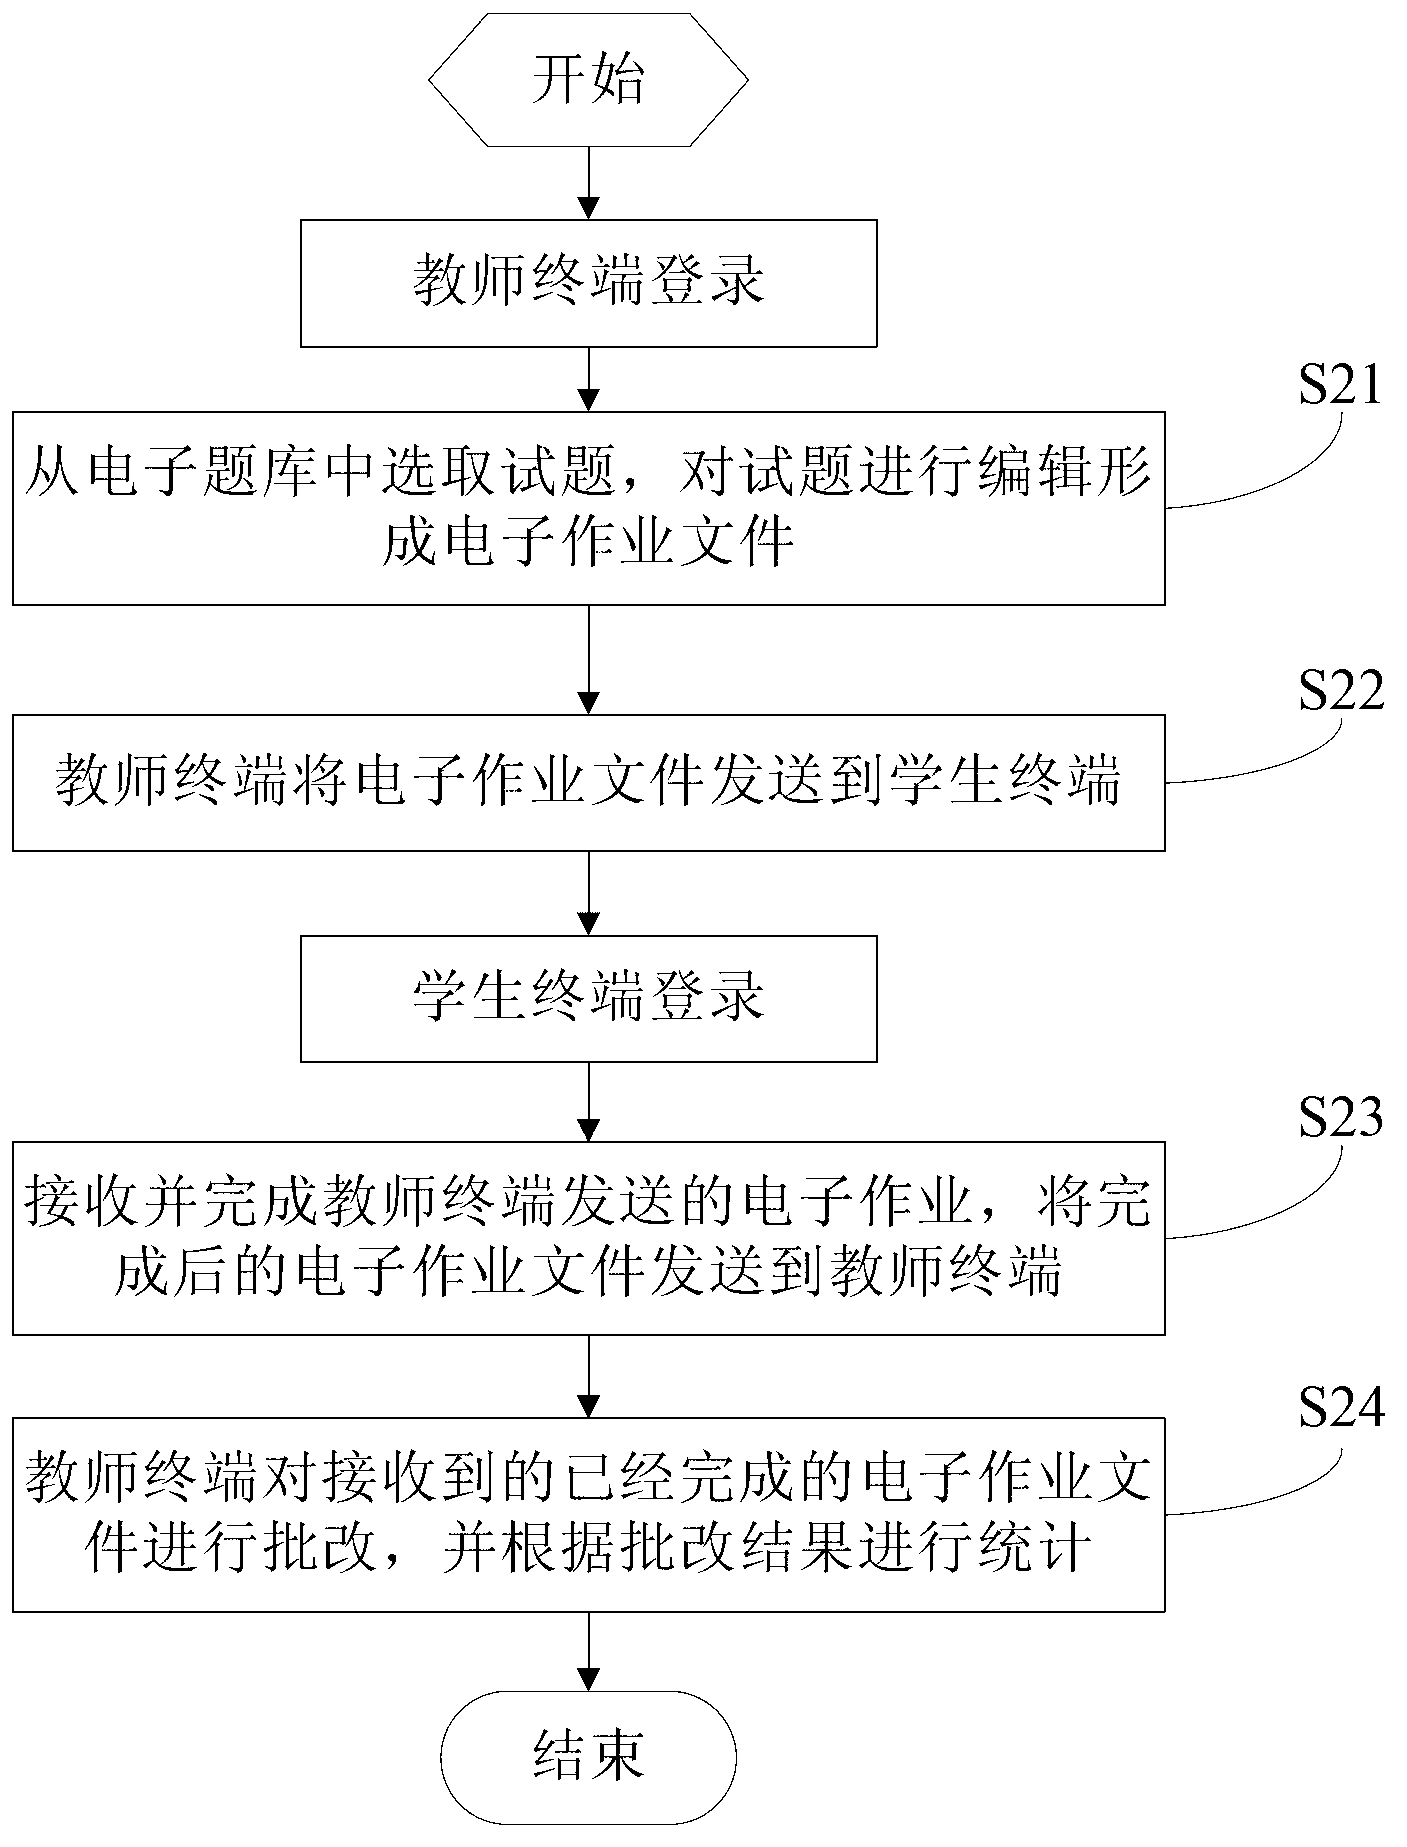 Electronic assignment system and method allowing for automatic distributing, receiving, marking and counting